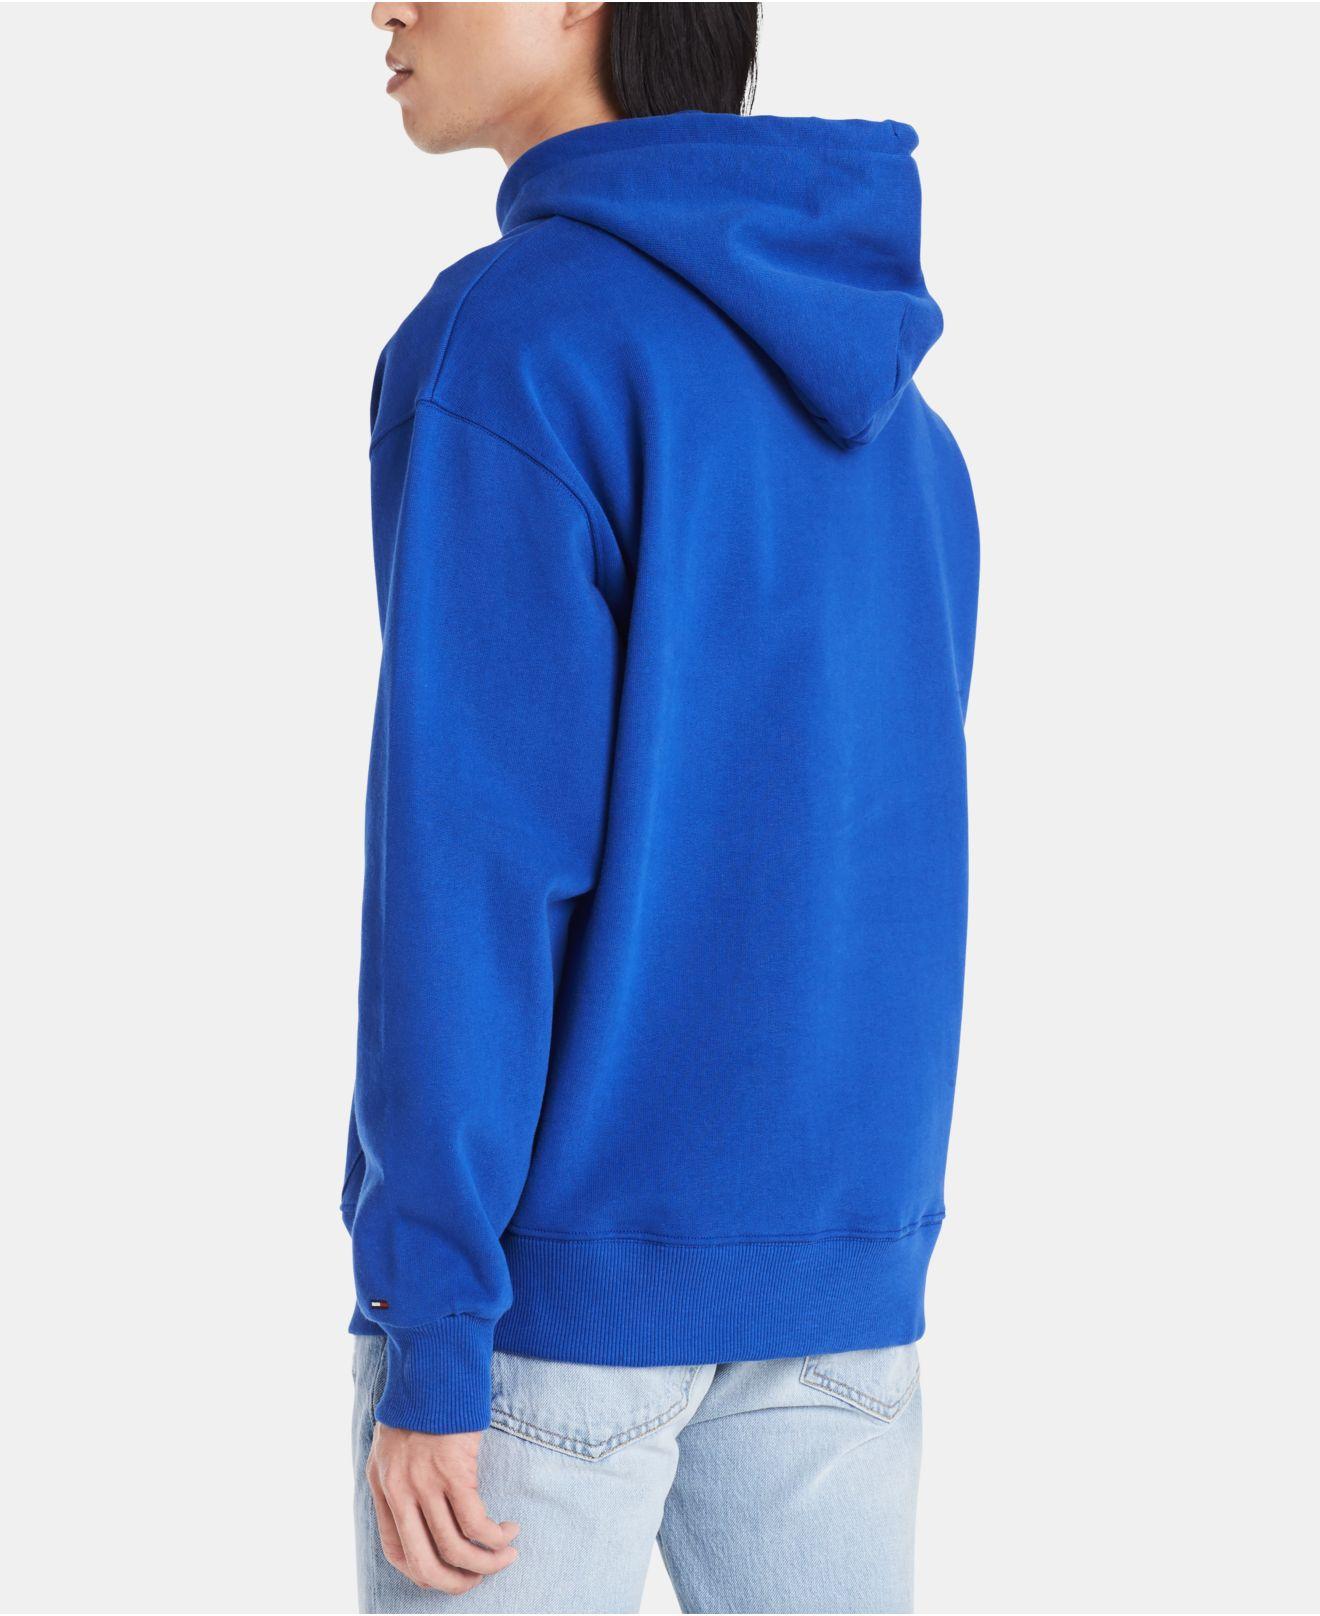 Tommy Hilfiger Cotton Signature Hoodie in Blue for Men - Lyst